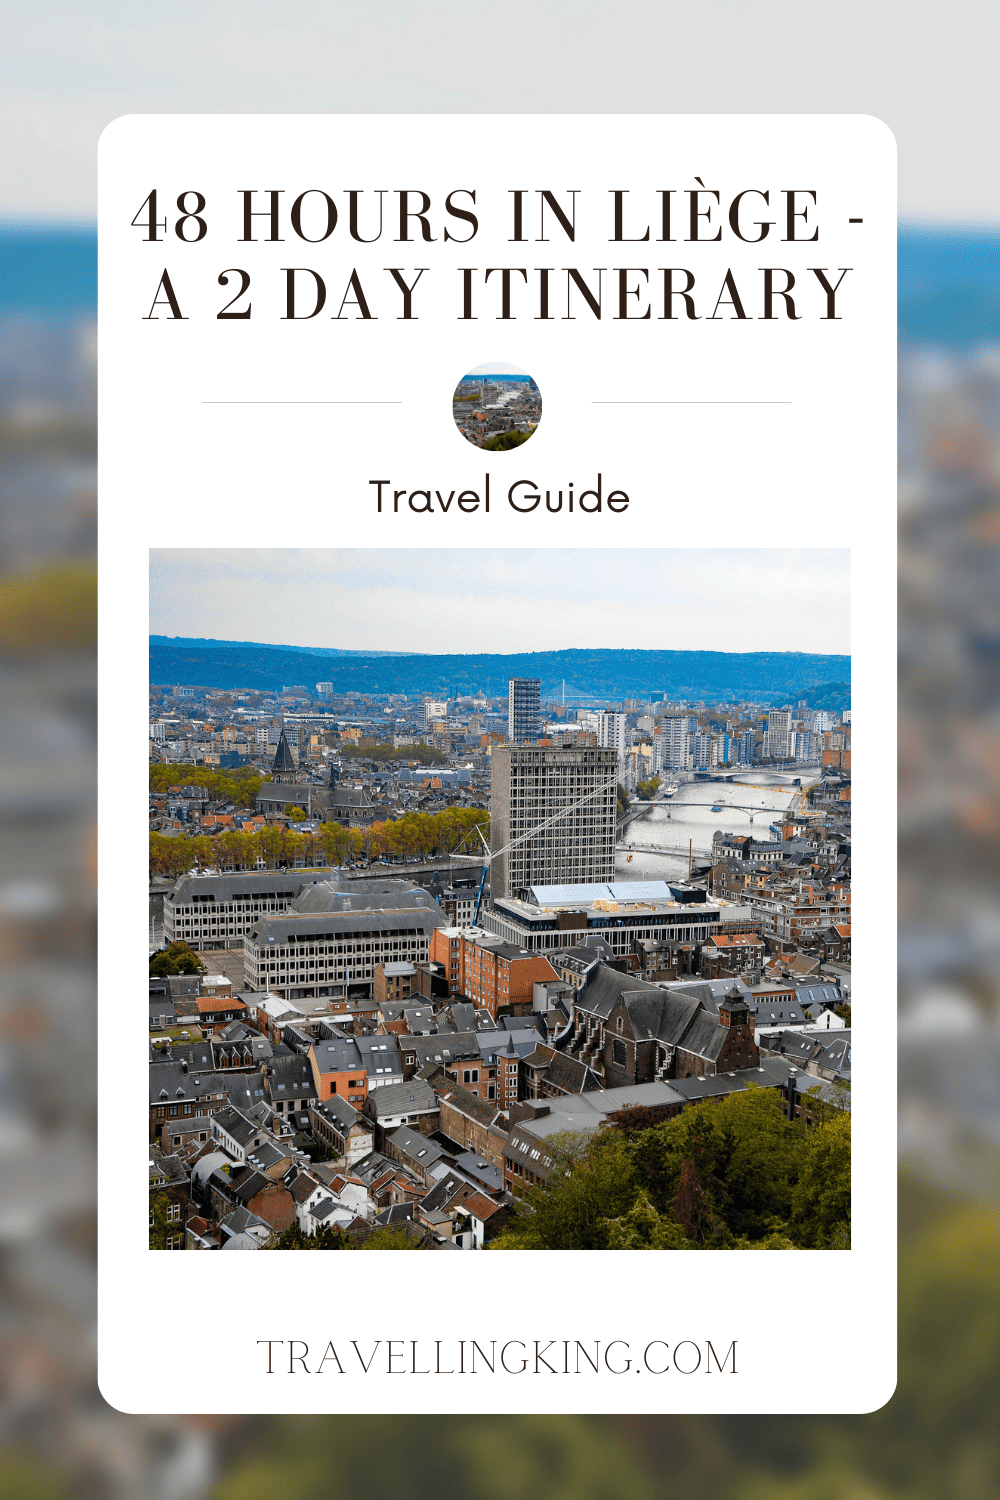 48 hours in Liège - A 2 day Itinerary